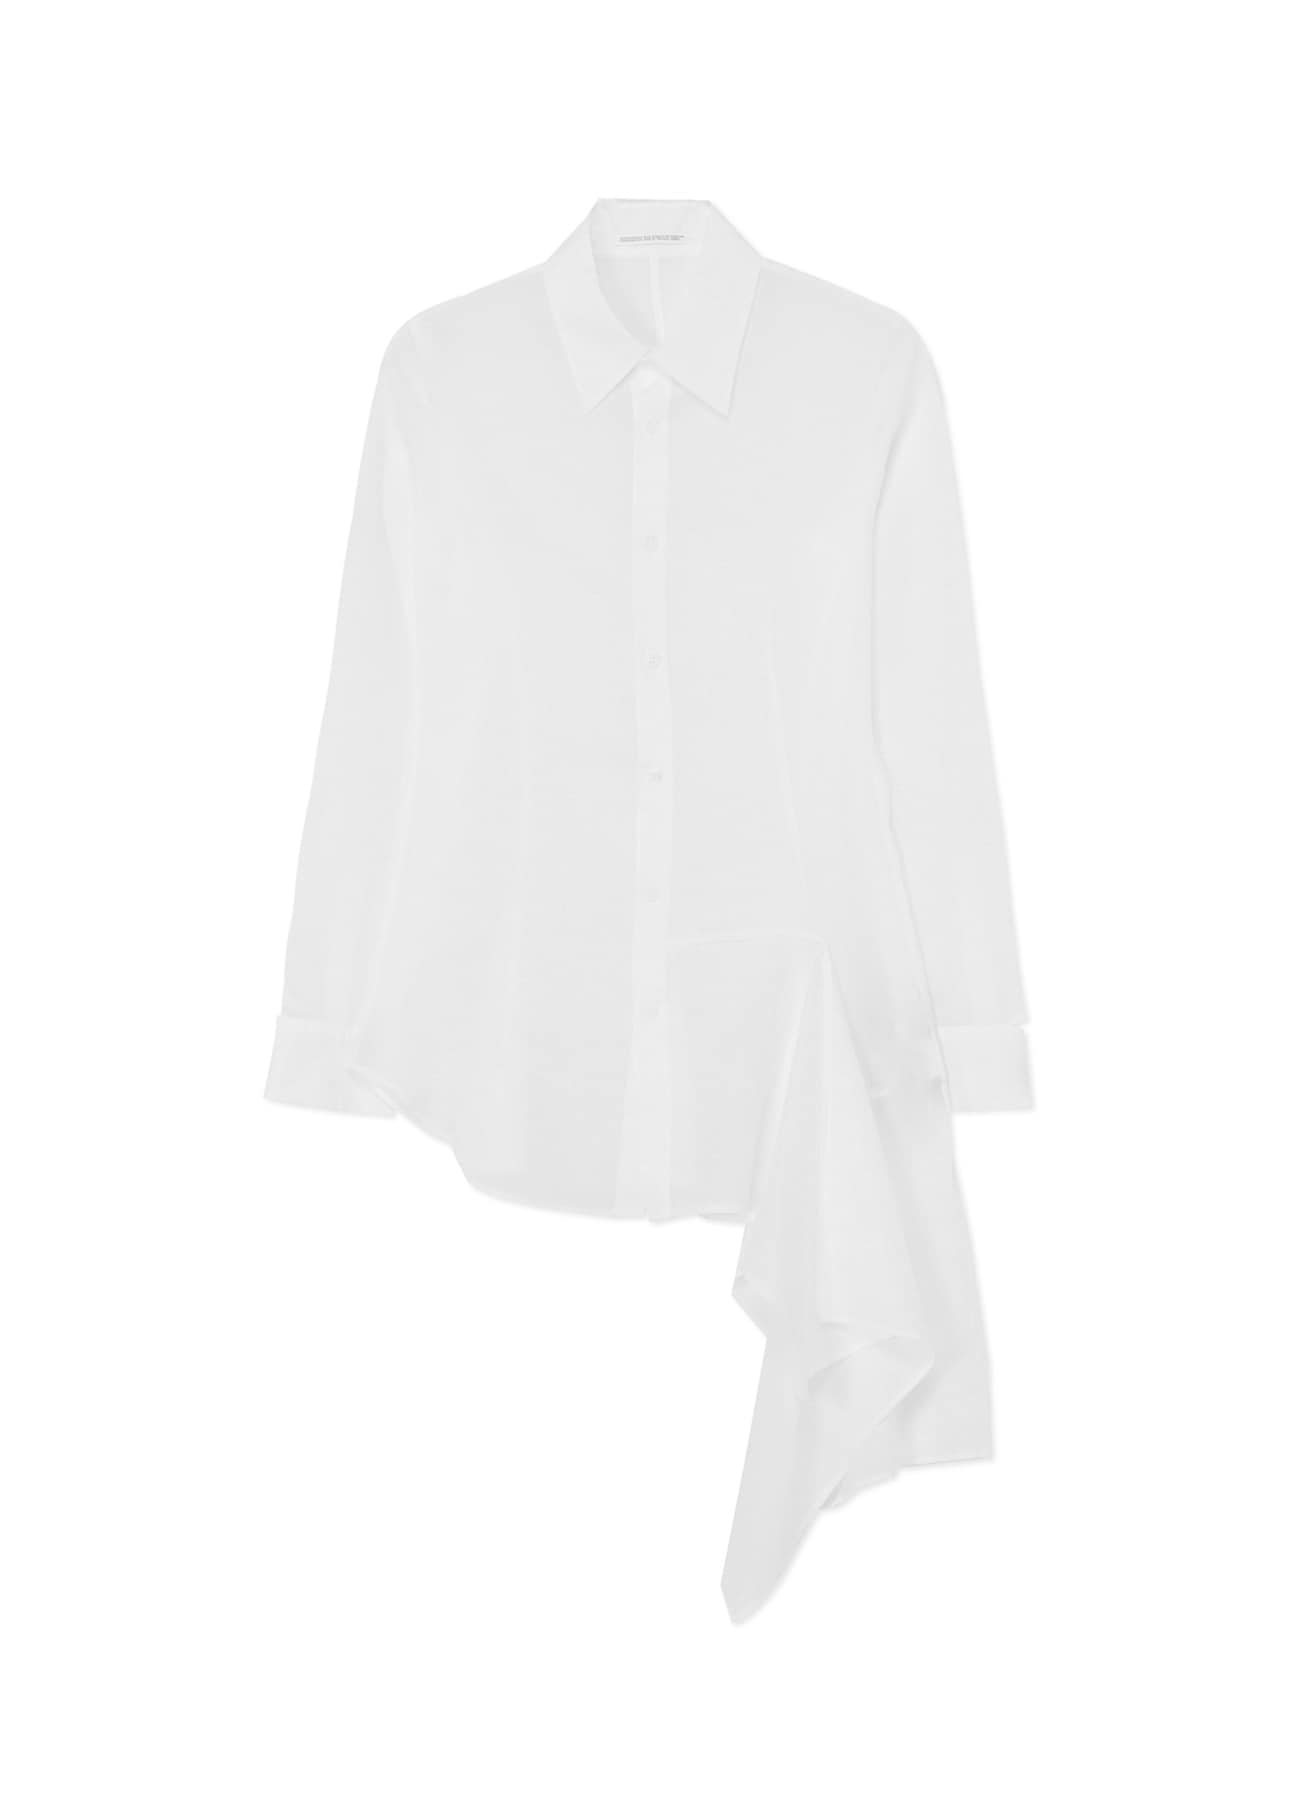 CELLULOSE LAWN SHIRT WITH FRONT HEM DRAPE DETAIL